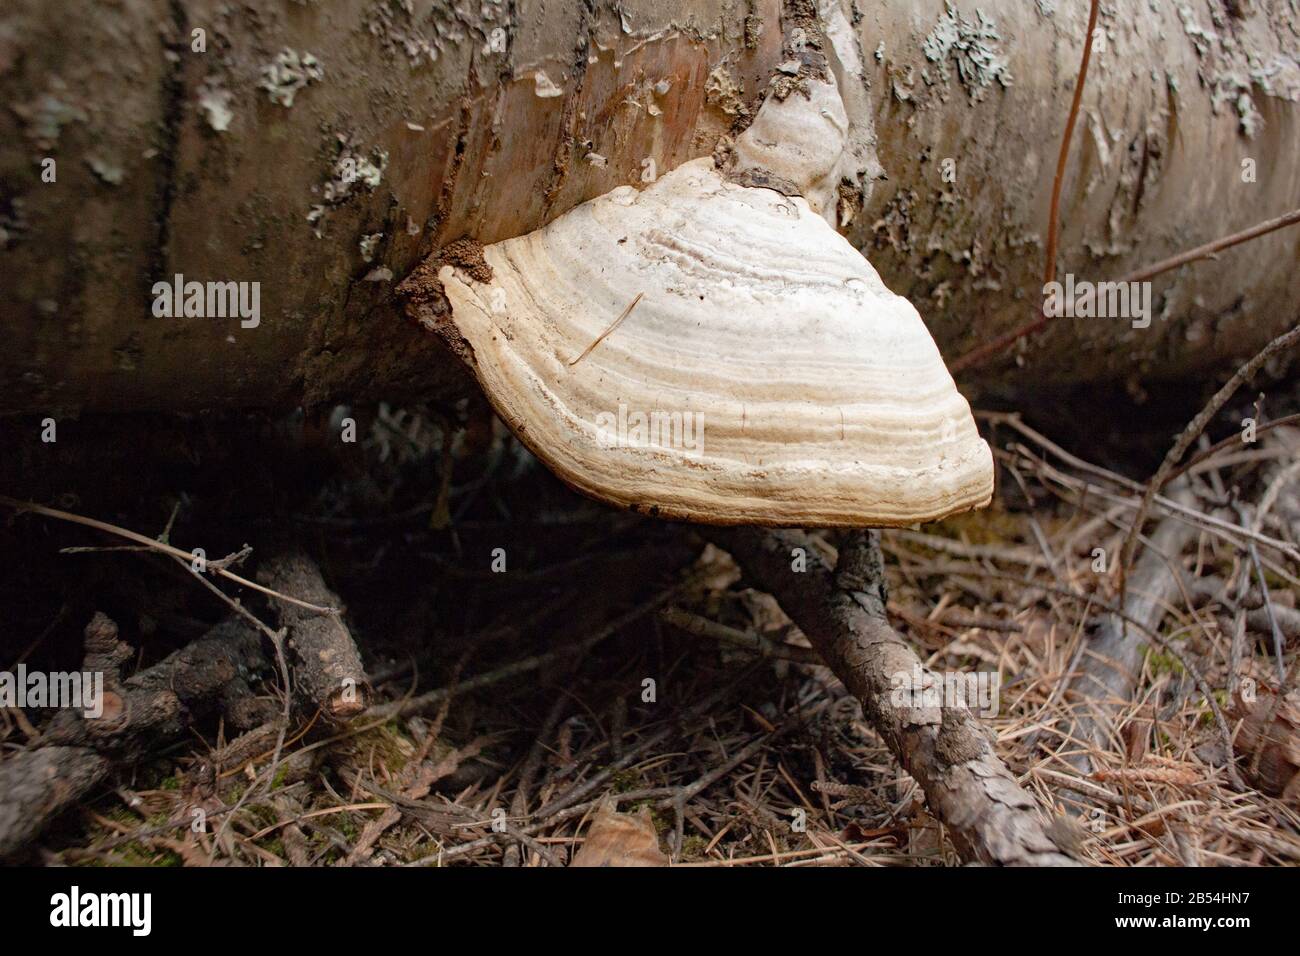 A Tinder Conk mushroom, Fomes fomentarius, growing on a dead red birch tree, Betula occidentalis, along Callahan Creek, in Troy, Montana. Stock Photo